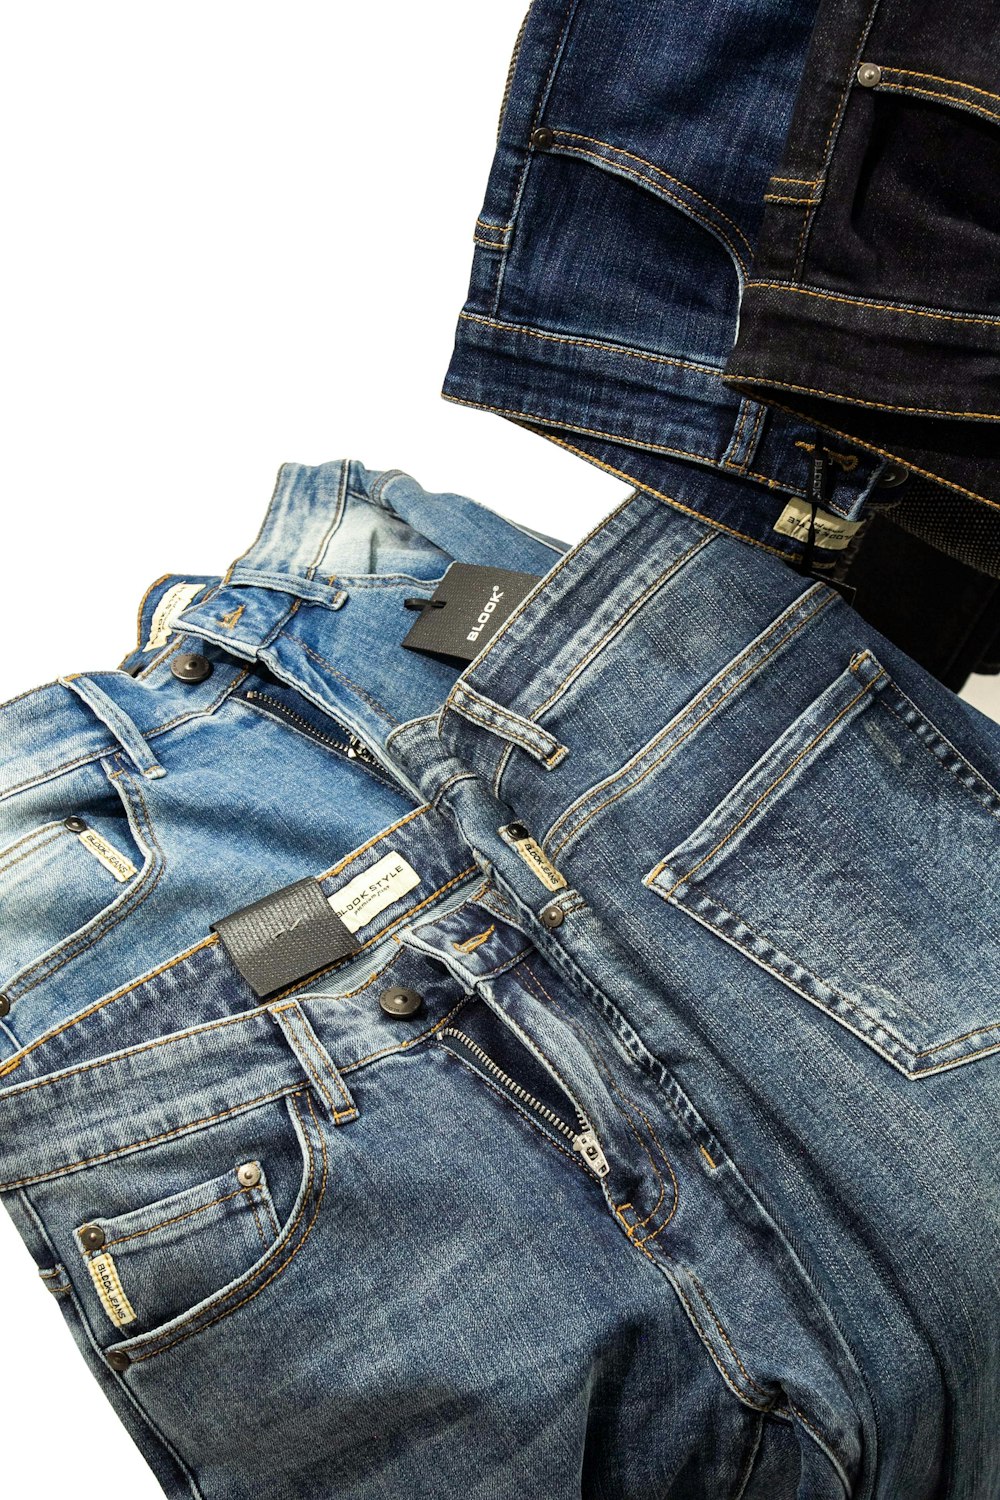 a pair of jeans with a cell phone in the back pocket